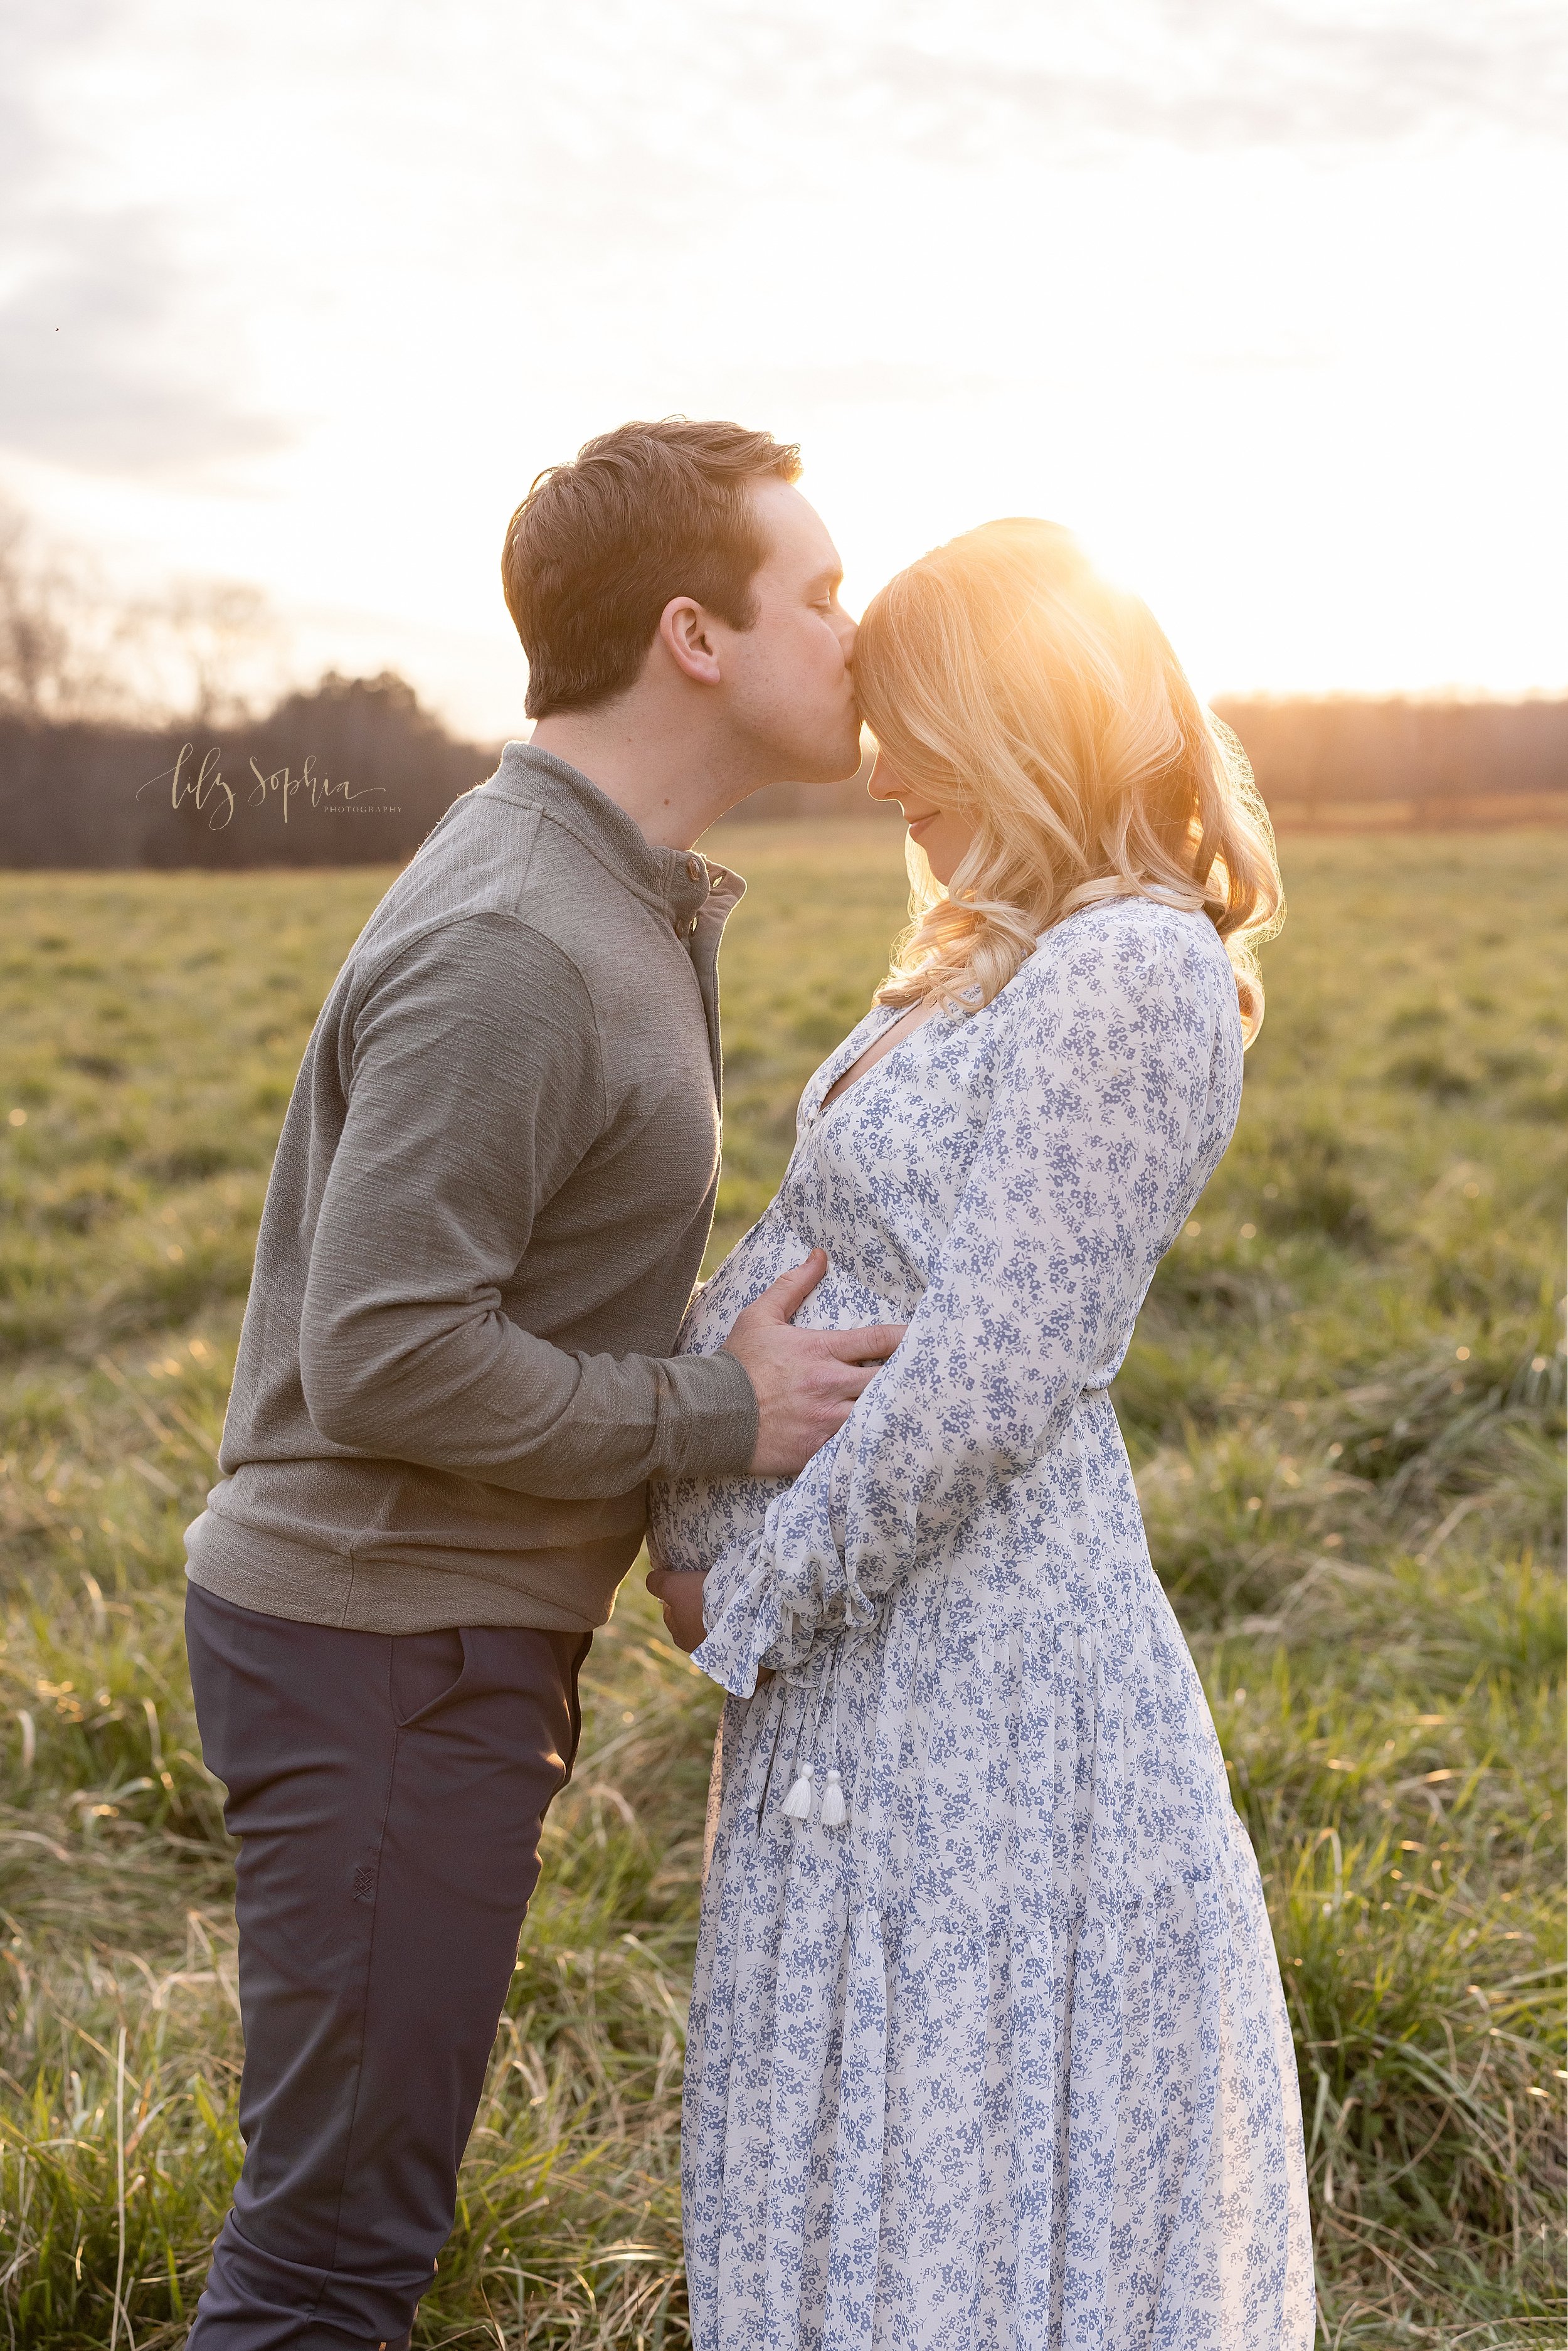  Maternity portrait of the love between husband and wife as the husband faces his wife and kisses her on her forehead while placing his hands on his child in utero as the couple stands with the sun setting behind them in a field near Atlanta, Georgia